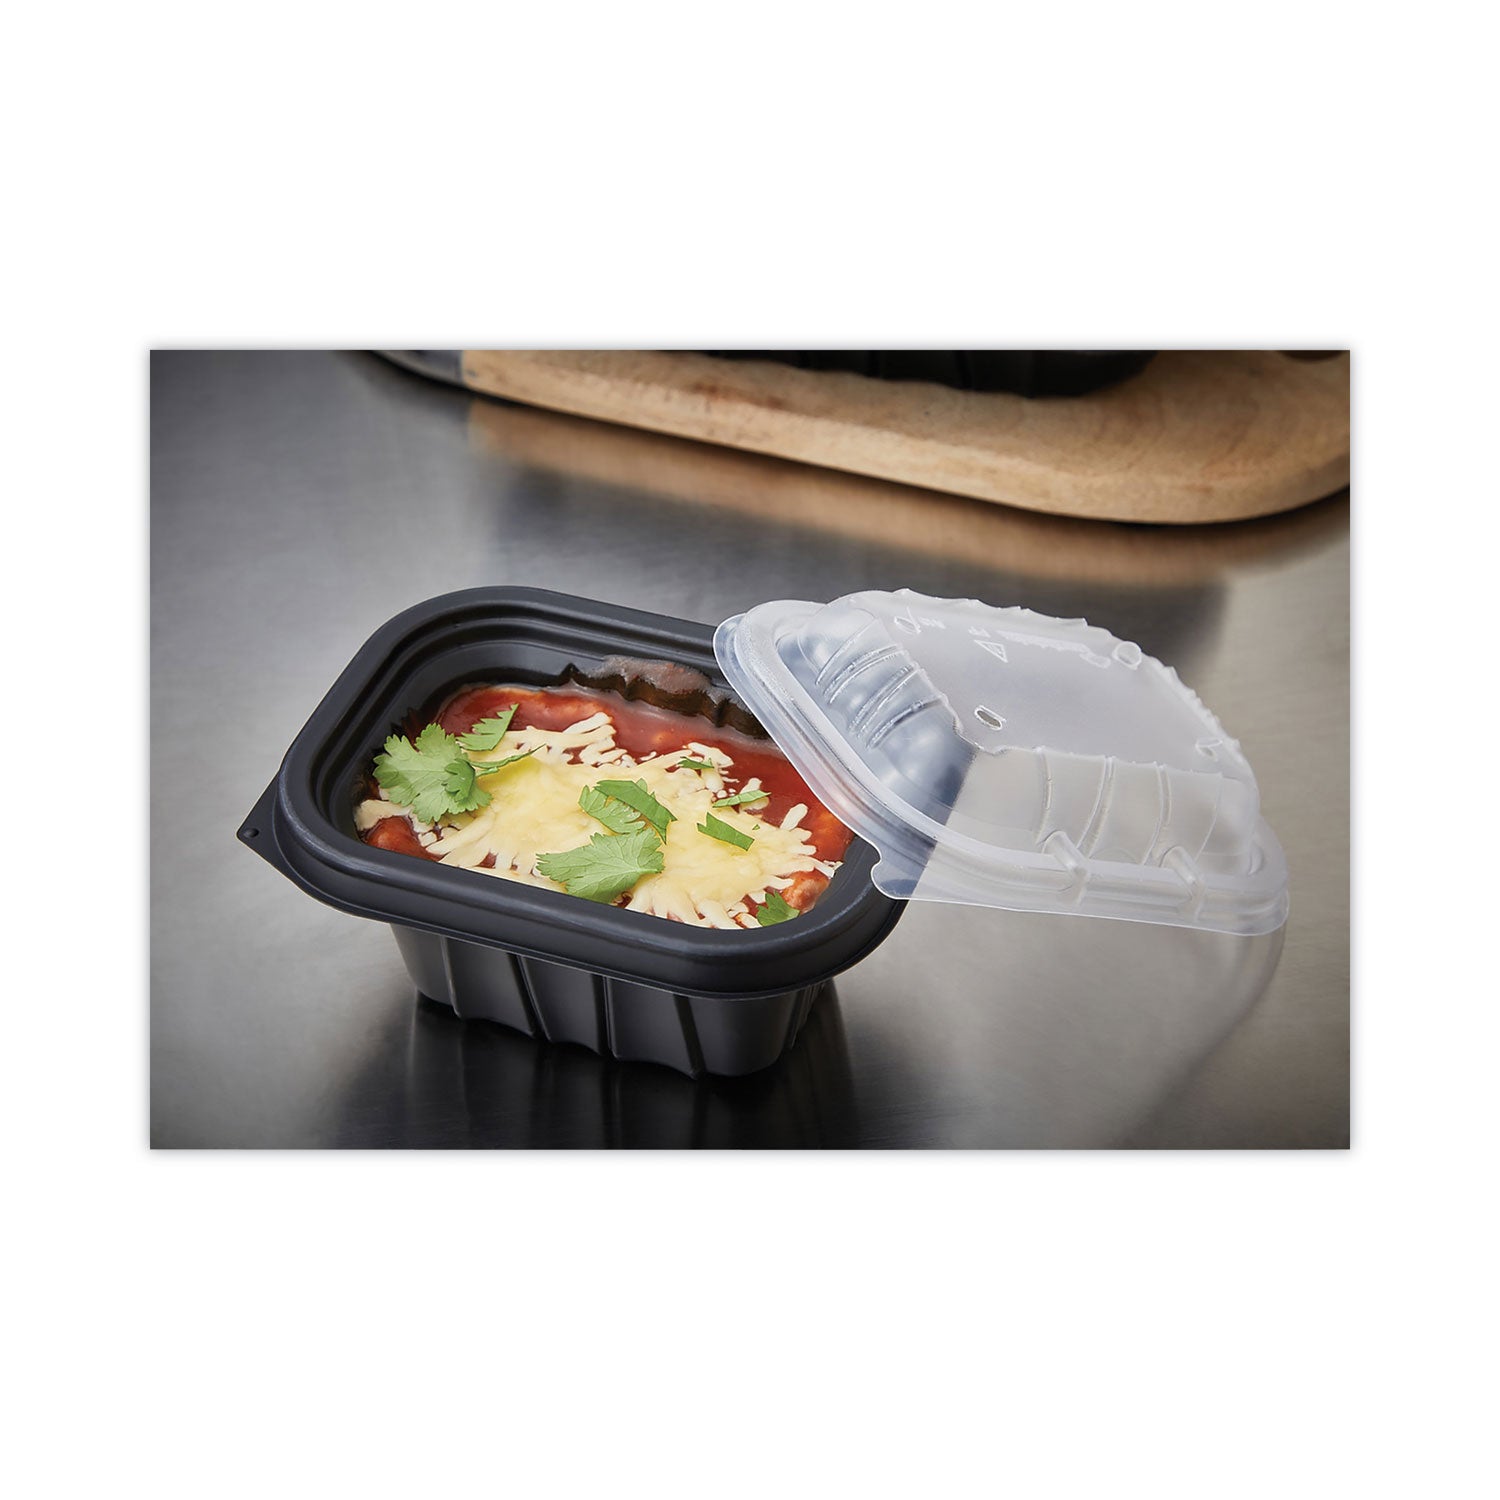 earthchoice-entree2go-takeout-container-12-oz-565-x-425-x-257-black-plastic-600-carton_pctycnb6x412000 - 3